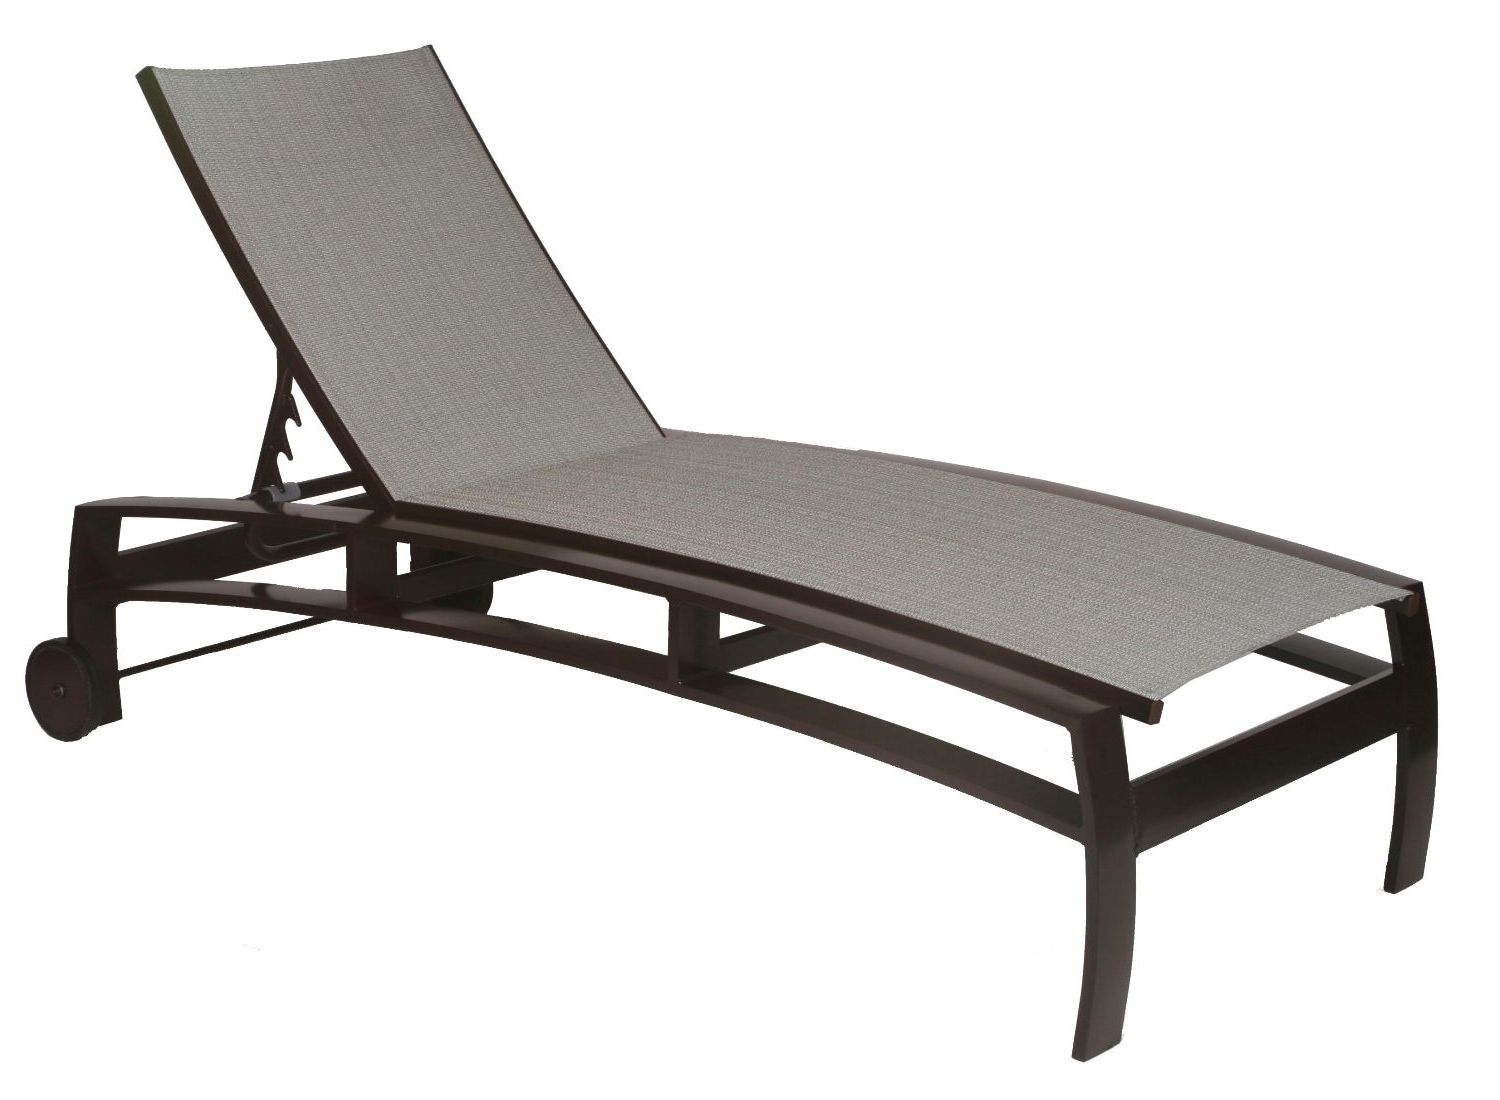 Preferred Sling Chaise Lounge Chairs For Outdoor Within Sling Chaise Lounge – Sling Chaise Lounge Outdoor Furniture, Sling (View 13 of 15)